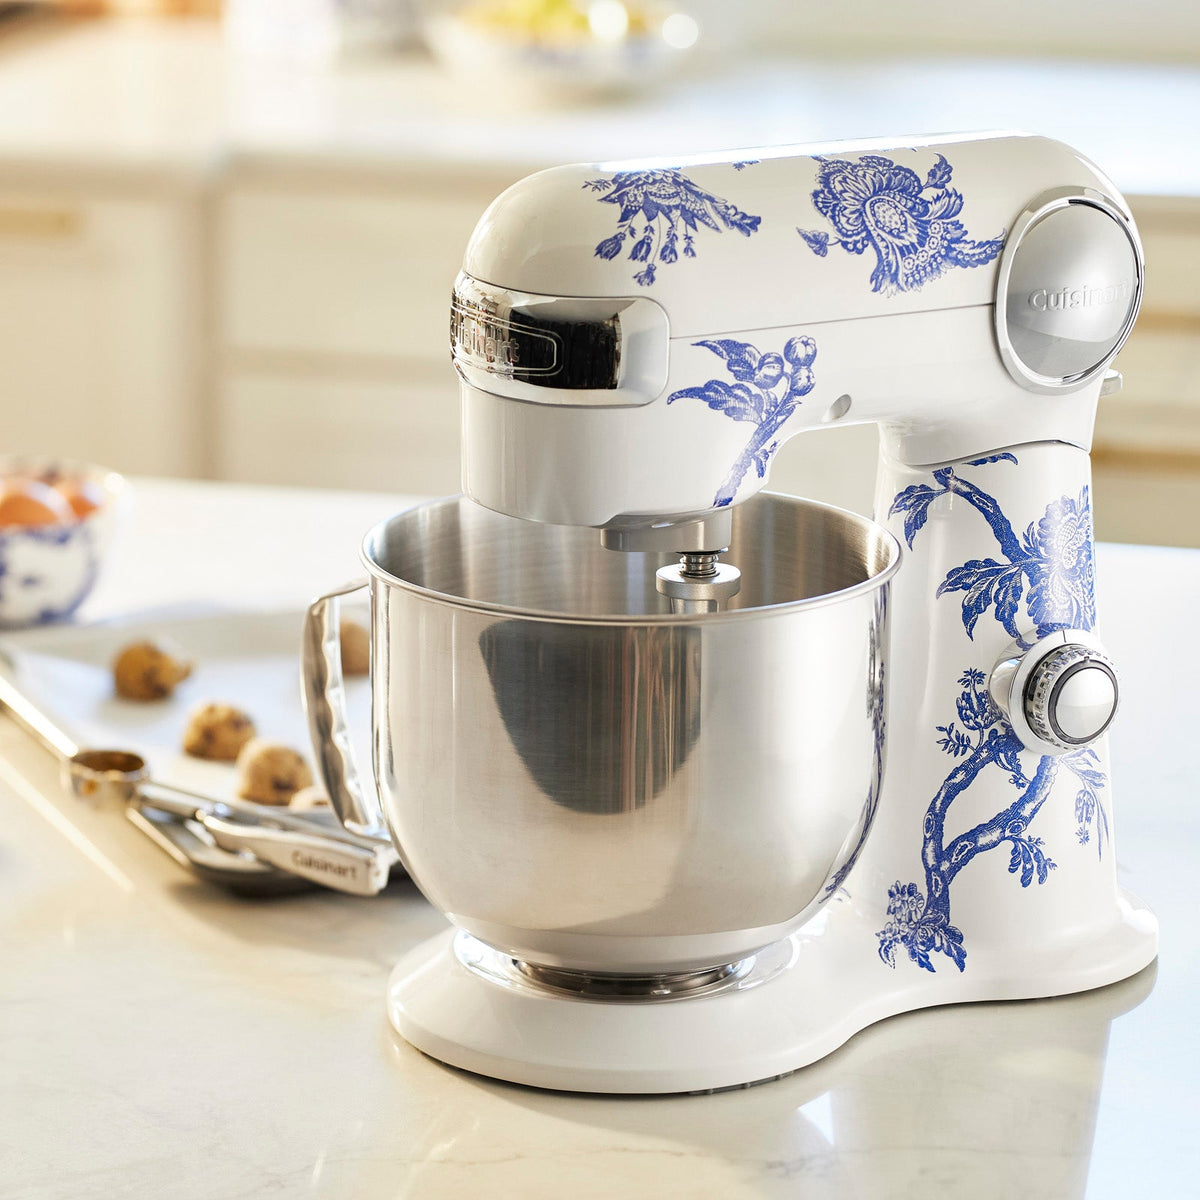 A Caskata X Cuisinart Limited Edition Arcadia Performance stand mixer, in blue and white, on a kitchen counter.